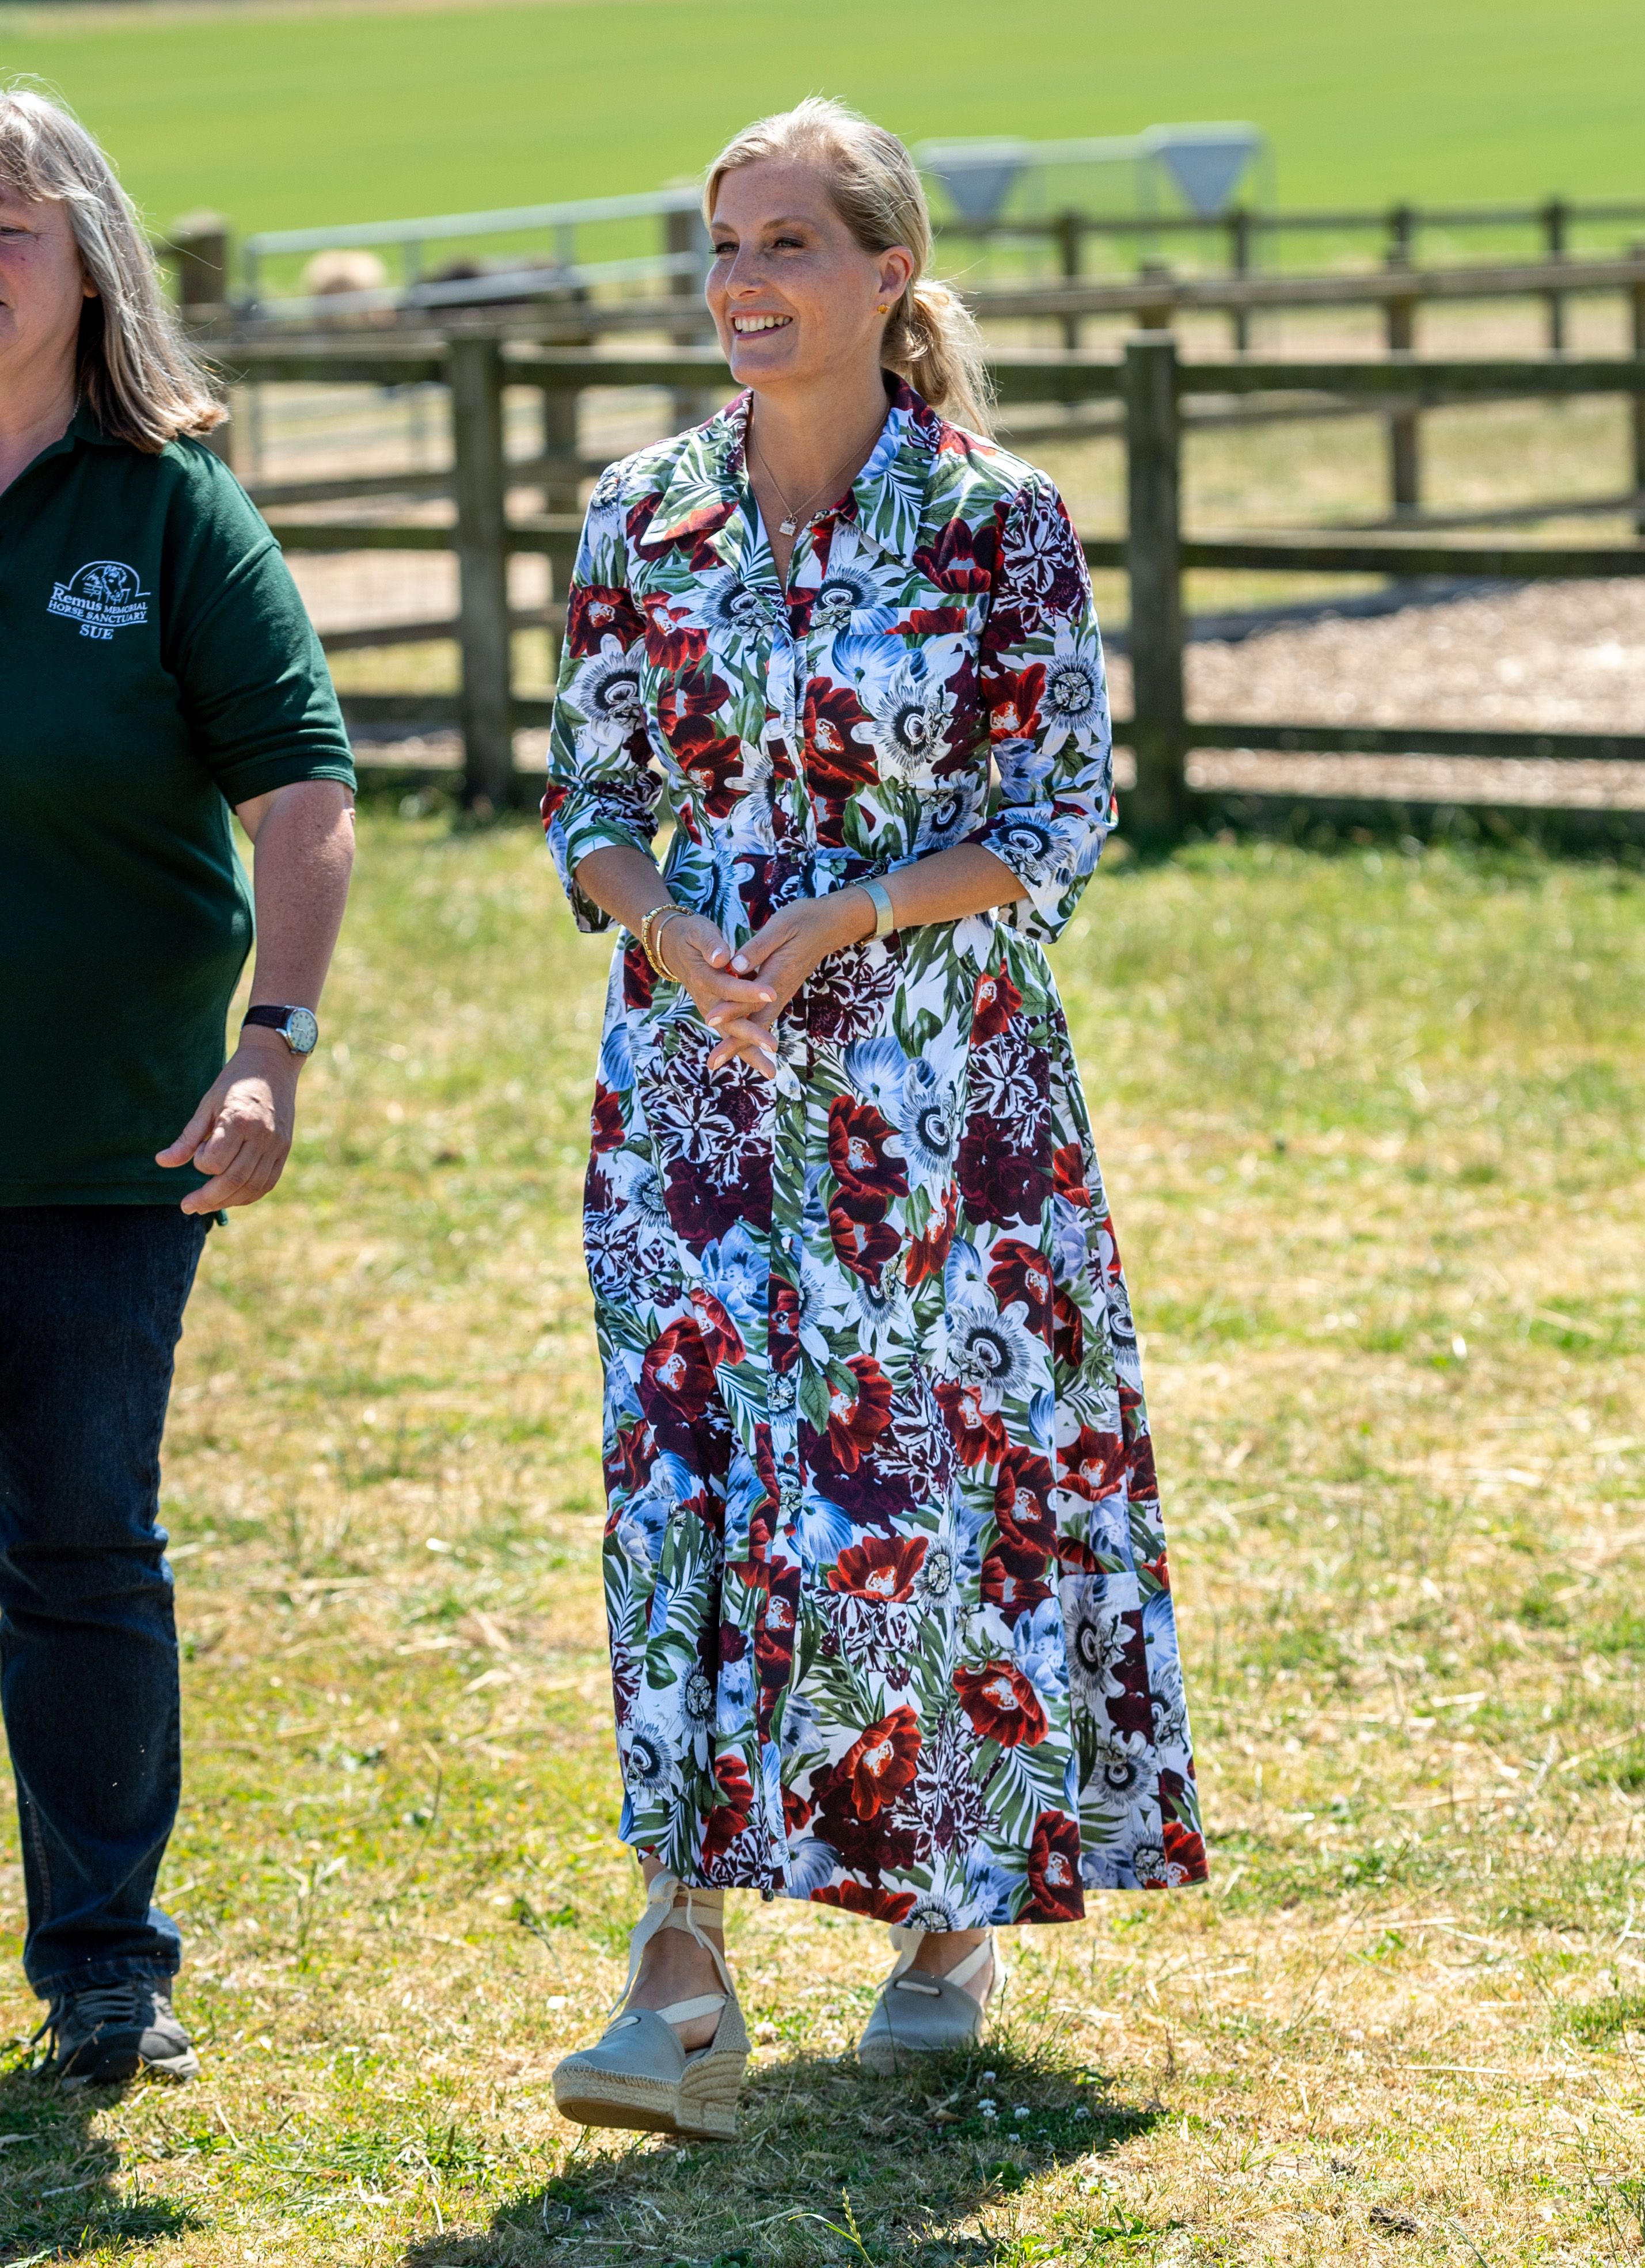 The royals' favourite espadrilles: Kate Middleton, Meghan Markle, Sophie  Wessex and more